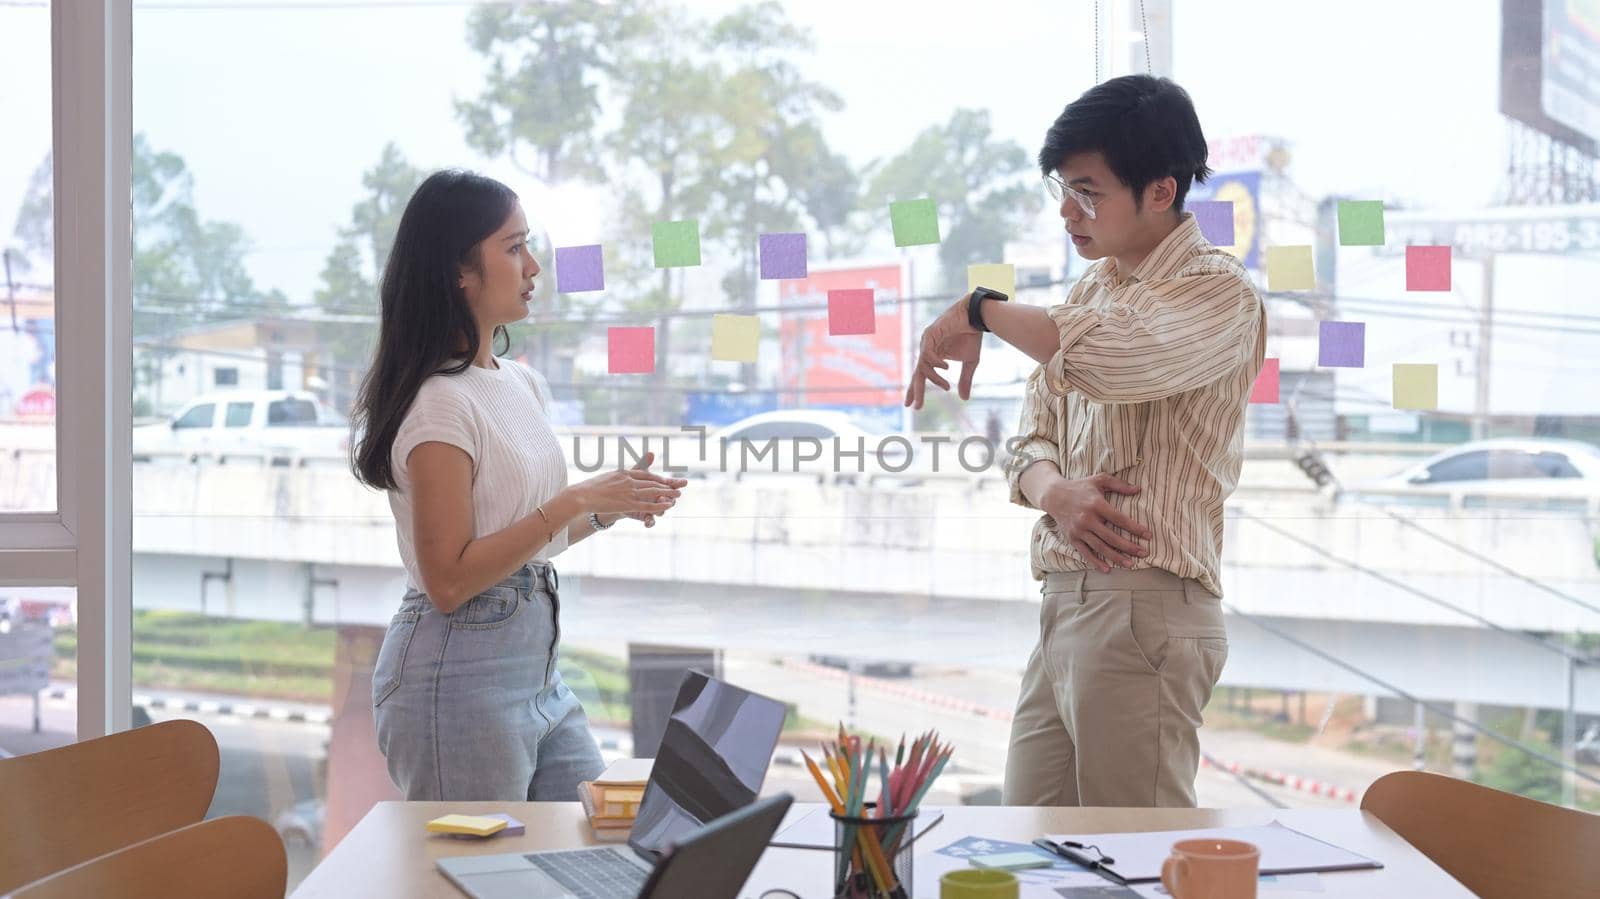 Two young businesspeople standing near large window at office with city buildings in background.